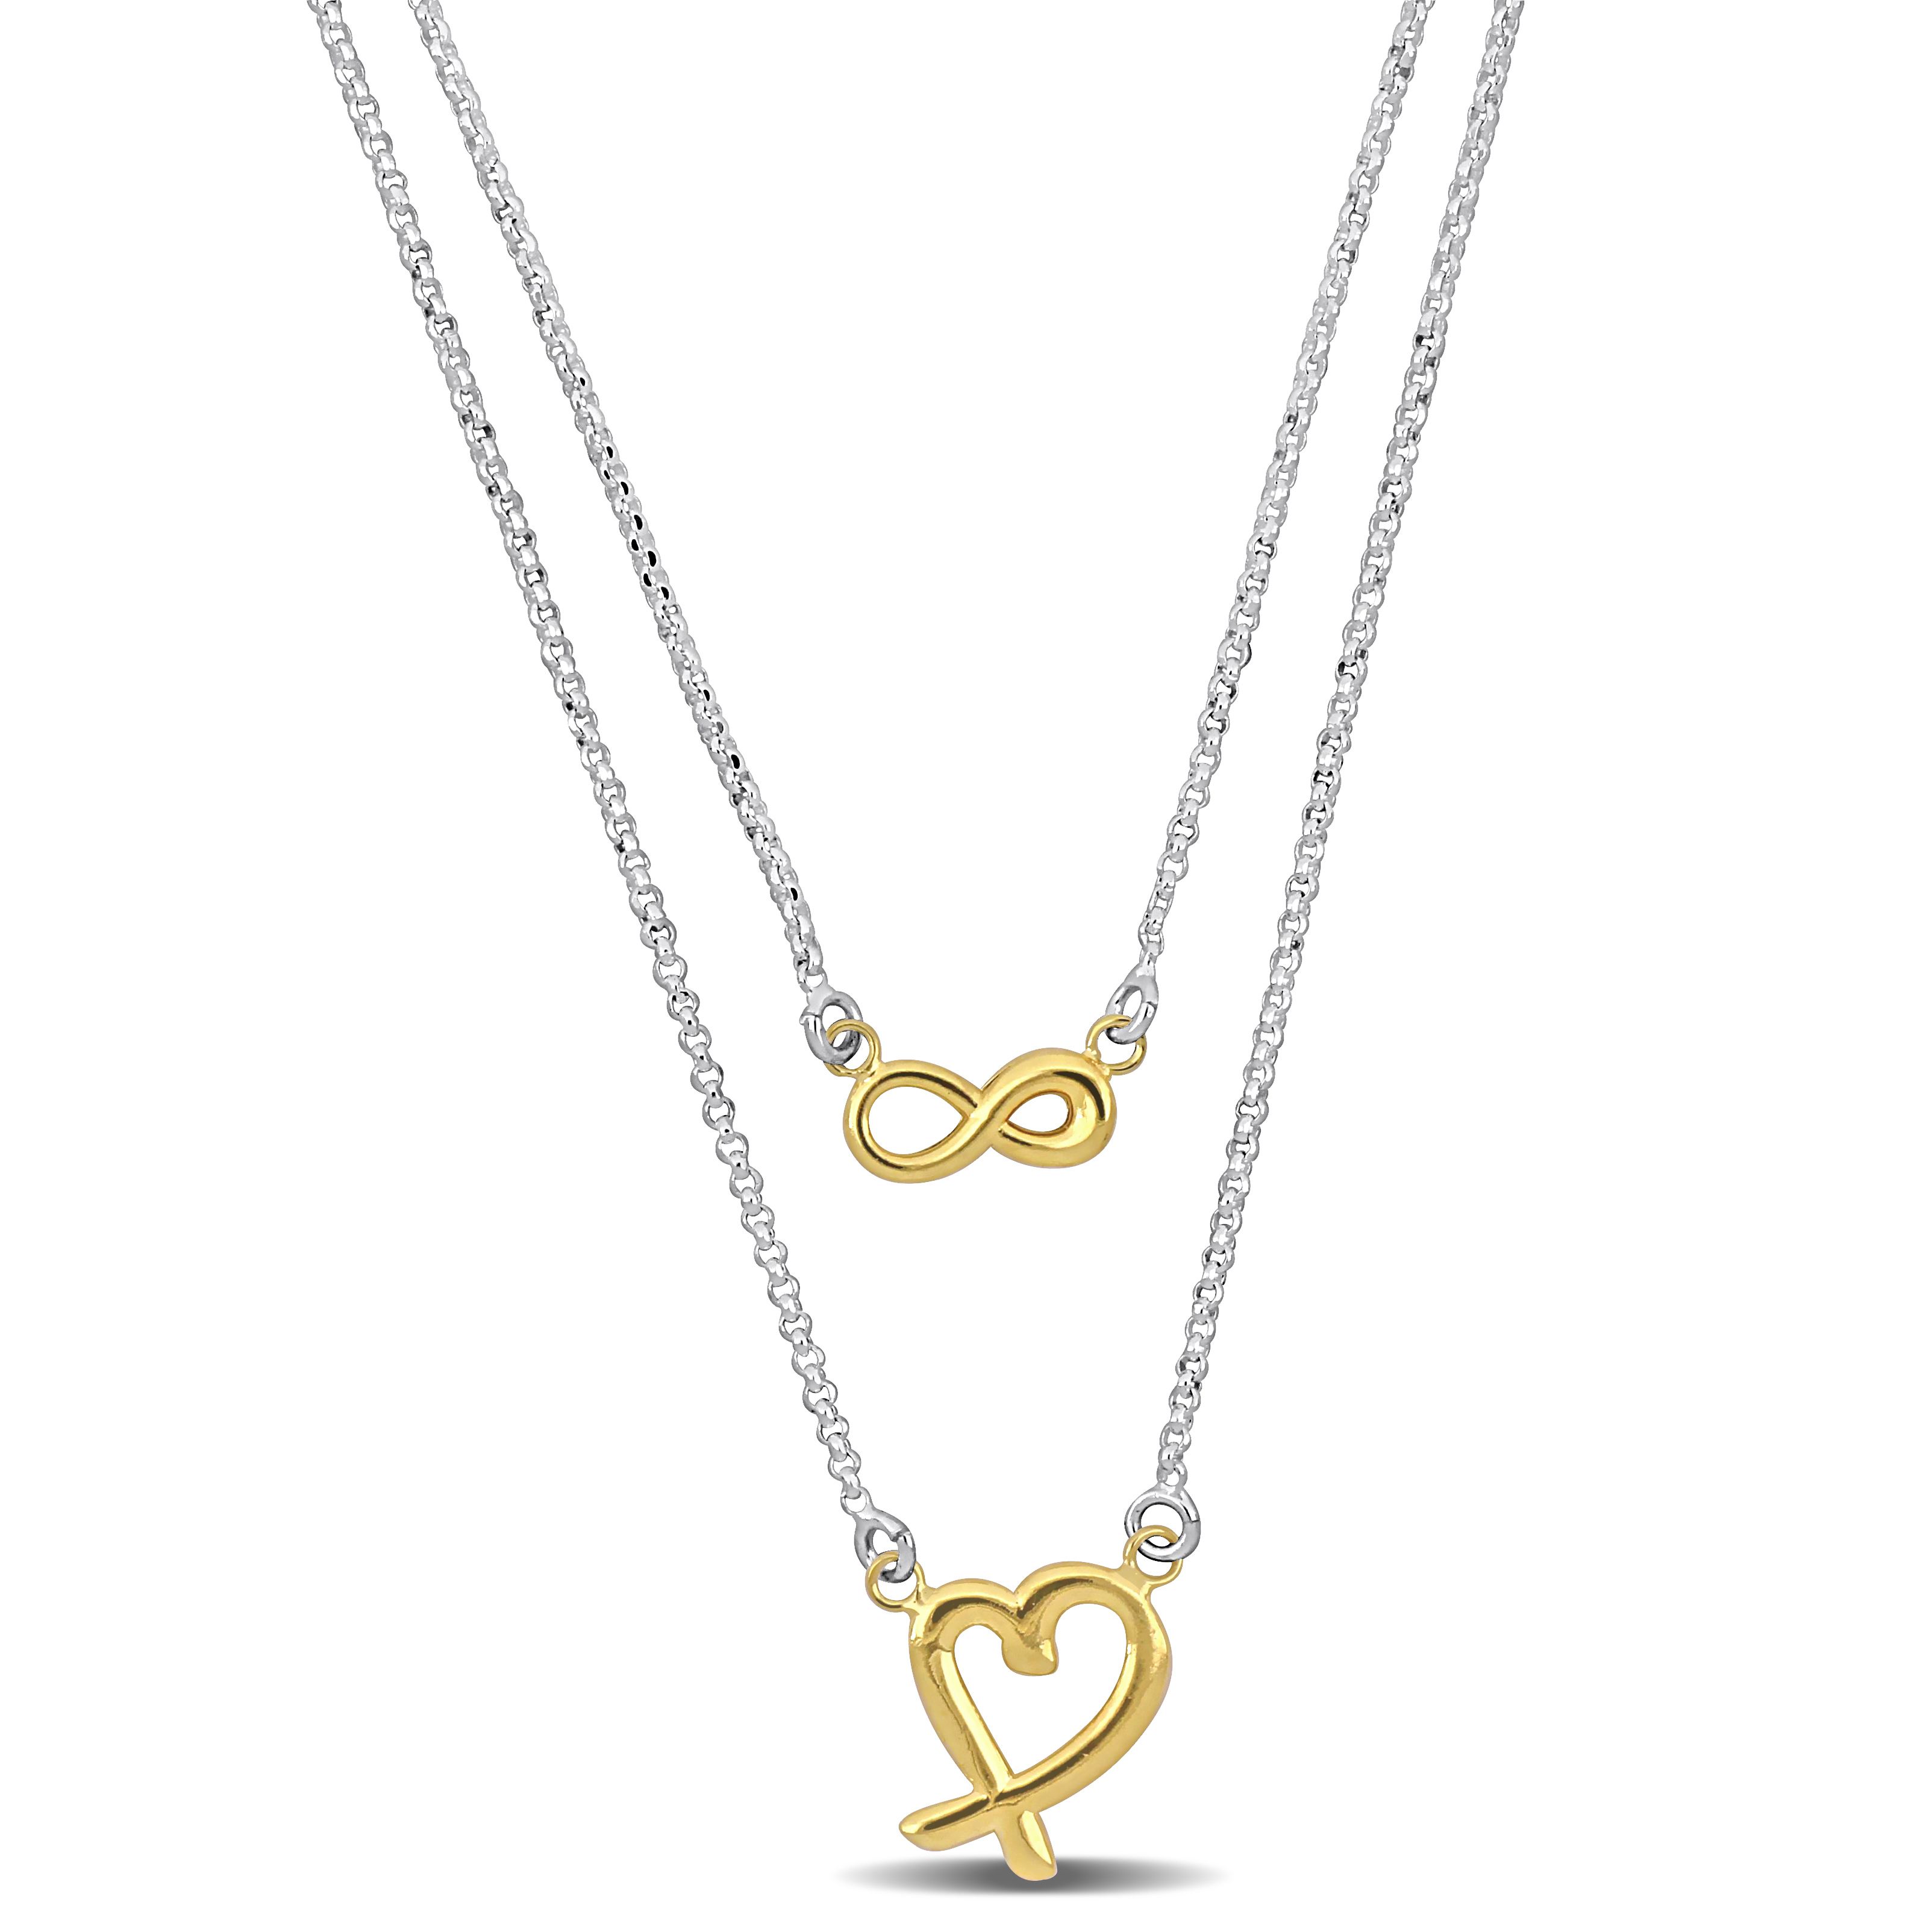 Yellow Infinity and Heart Charm Double Strand Necklace in Sterling Silver - 16+18+1 in.